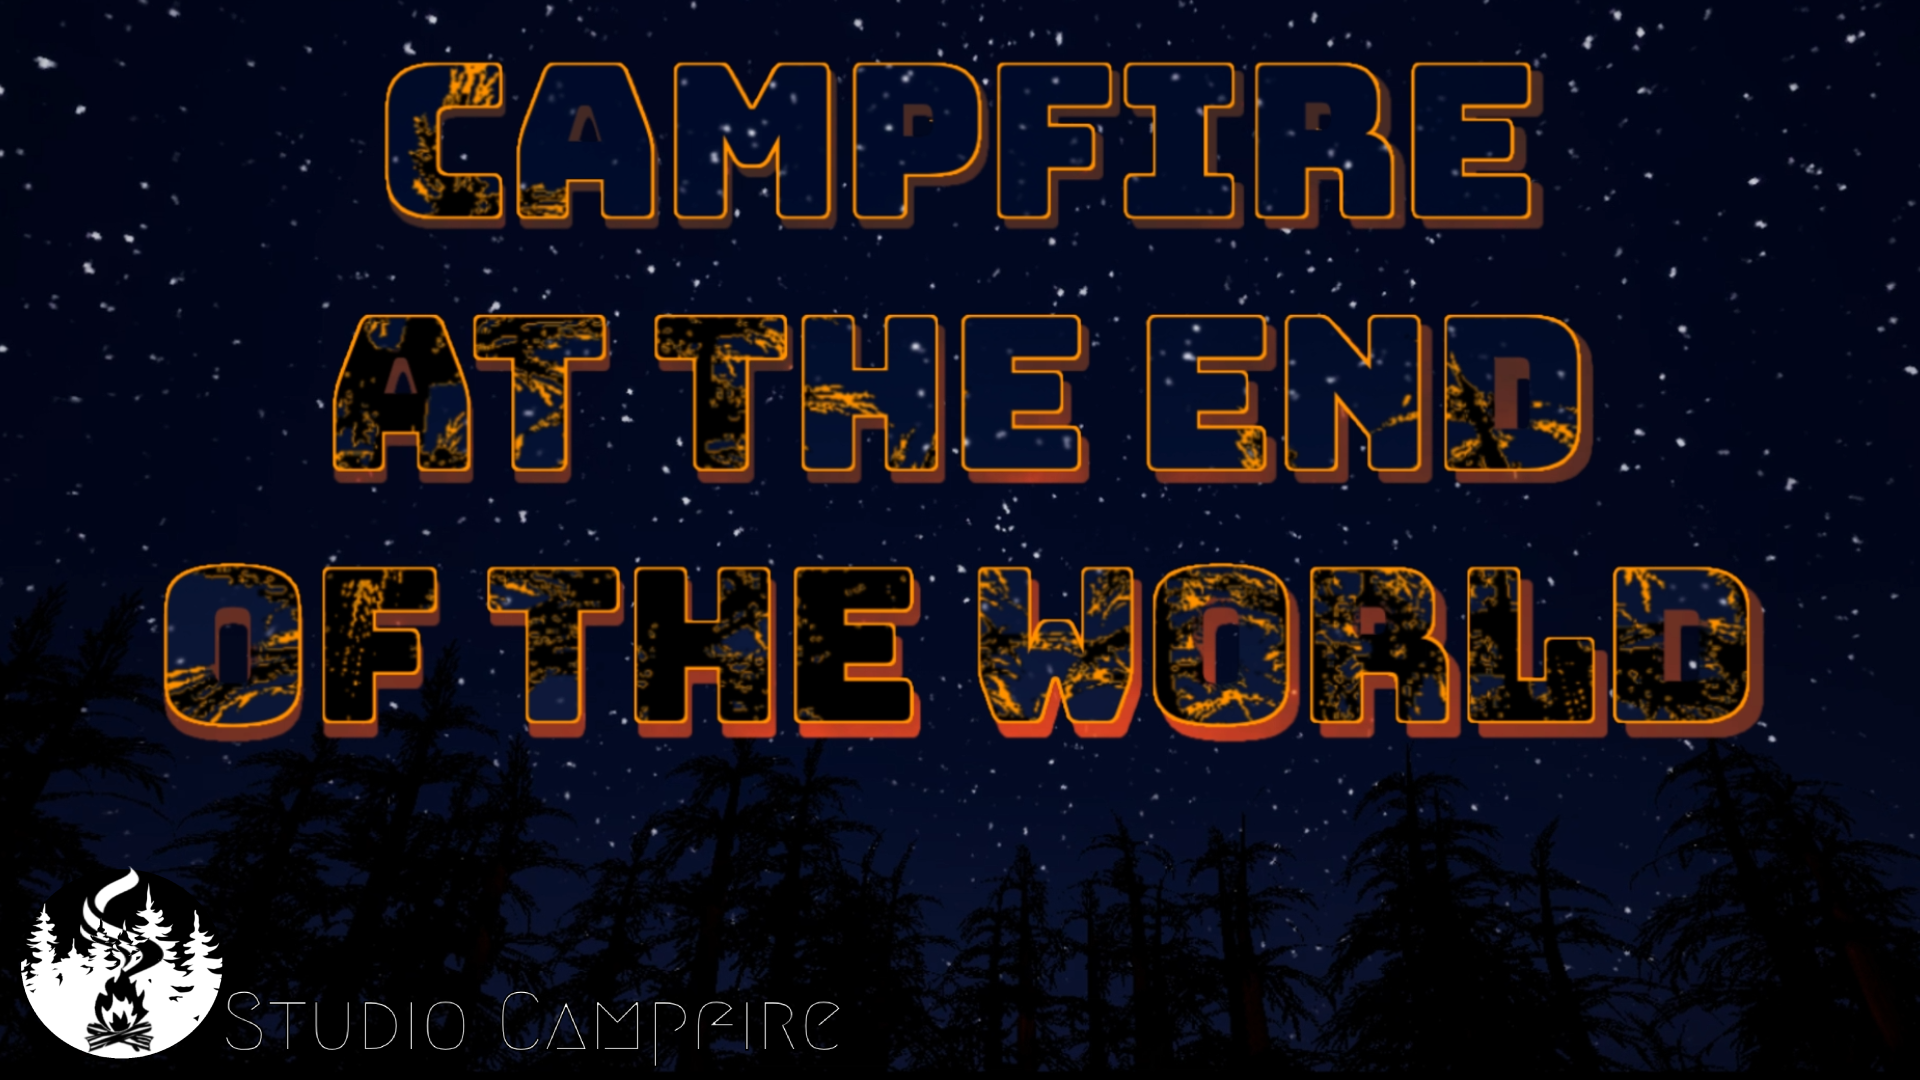 Campfire at the End of the World